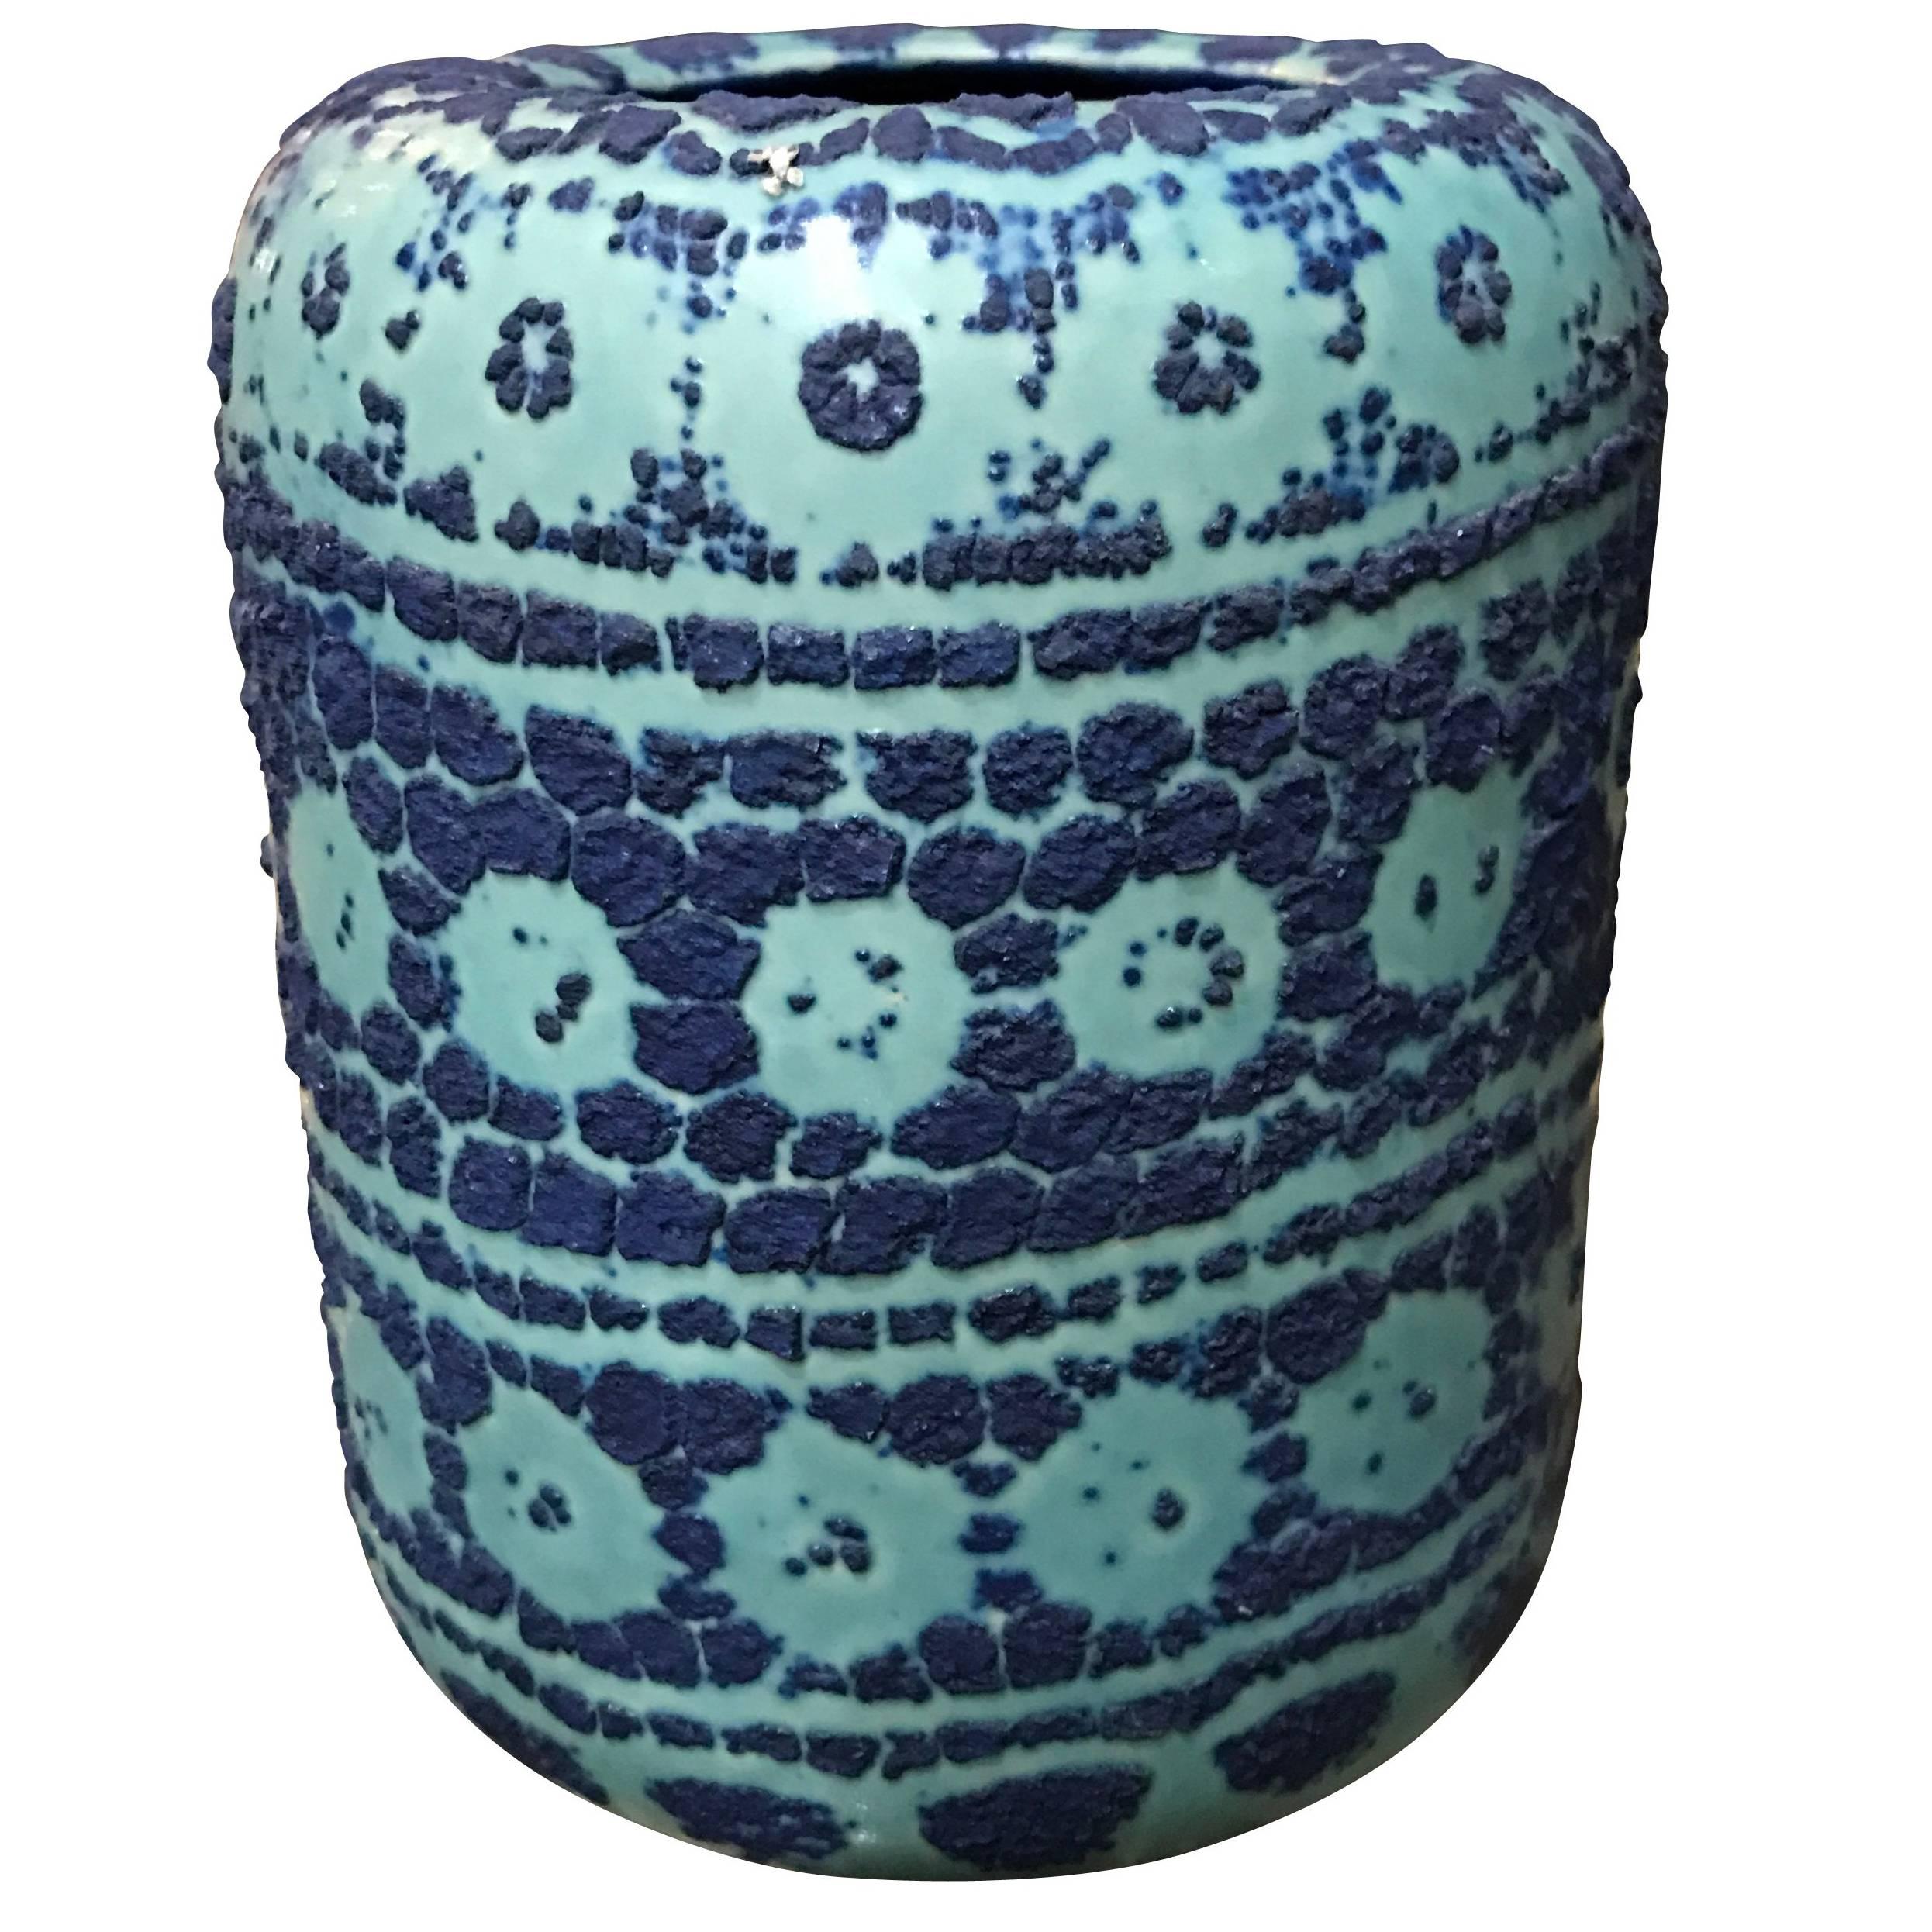 Vintage Inspired Design Turquoise Vase, Thailand, Contemporary